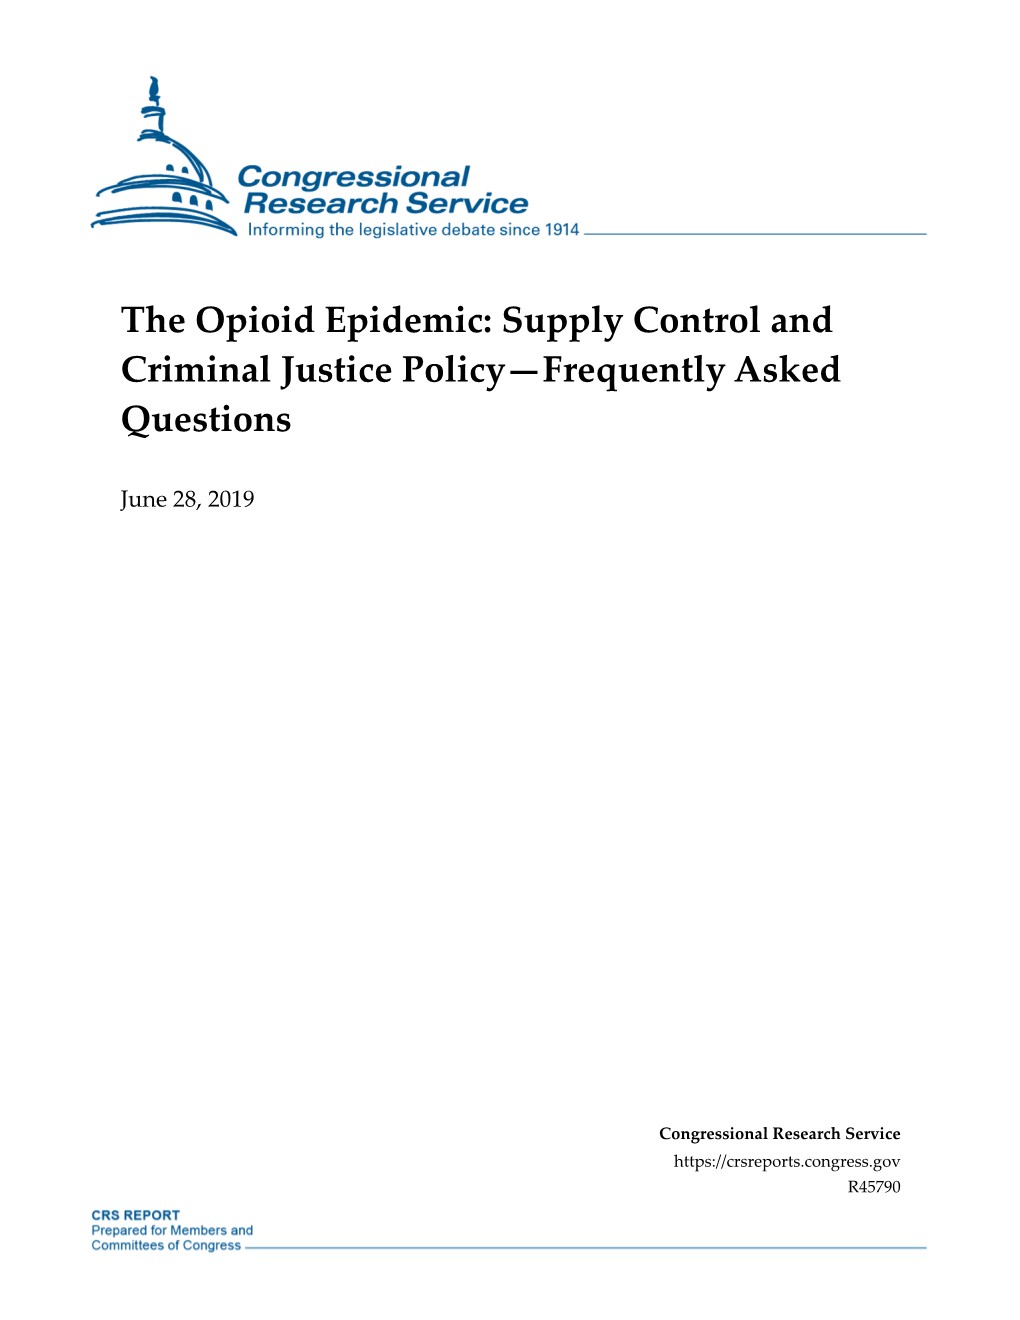 The Opioid Epidemic: Supply Control and Criminal Justice Policy—Frequently Asked Questions